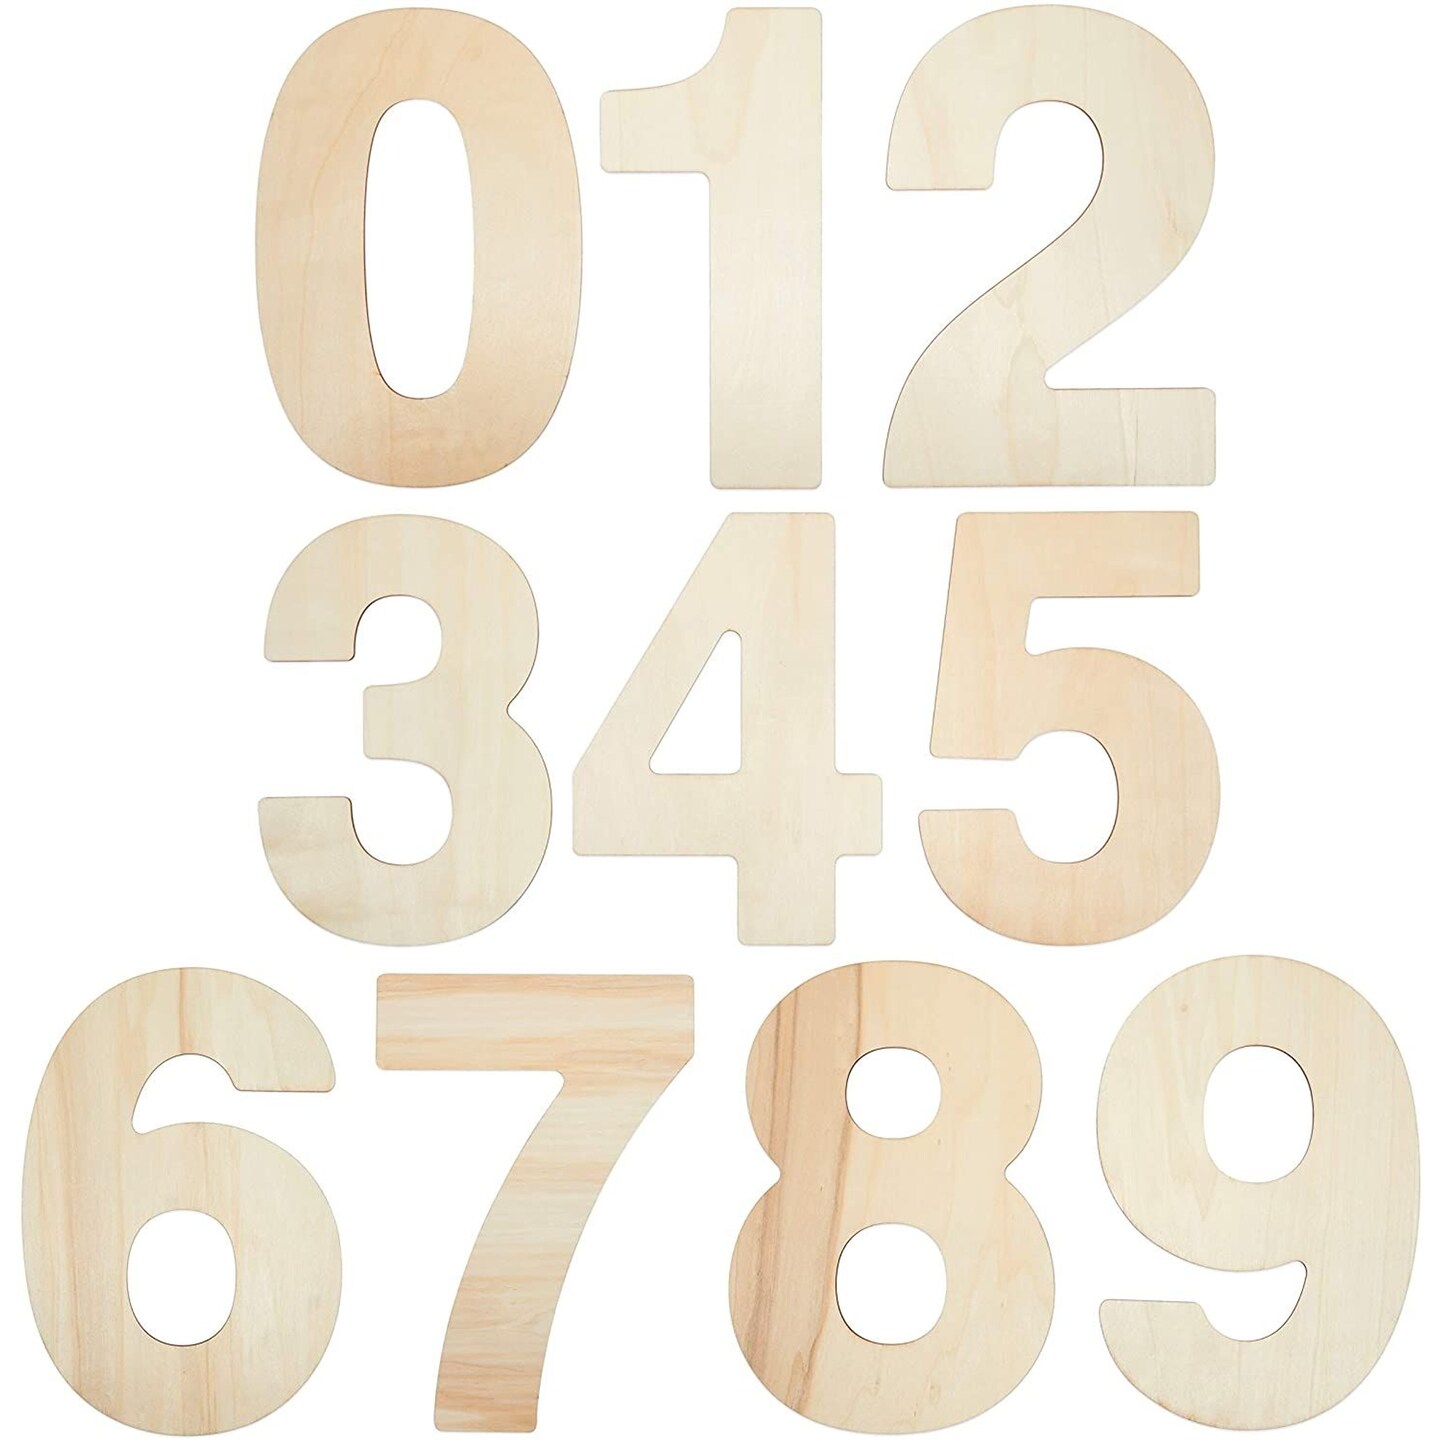 Bright Creations Unfinished Wooden Numbers For Crafts 0 9 12 Inches